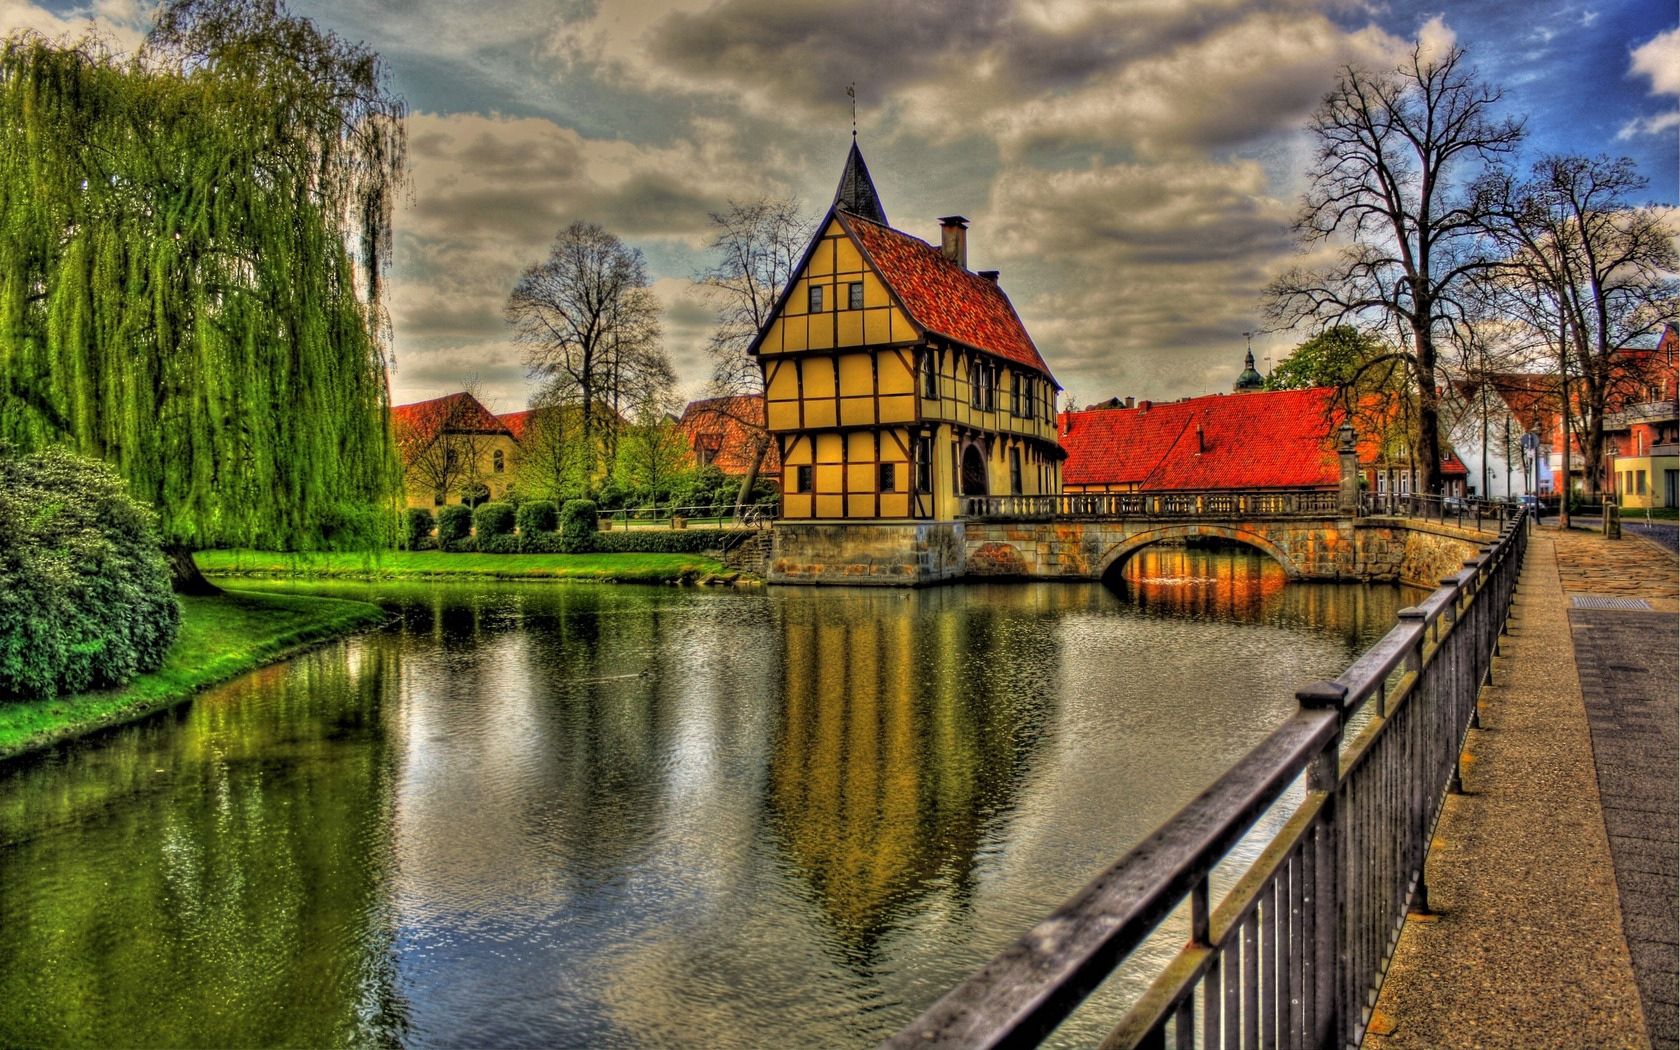 architecture, hdr, rivers, cities, green, water, houses, trees, grass, sky, clouds, city, reflection, road, beauty, house, bridge, colors, color, view, colorful, germany QHD